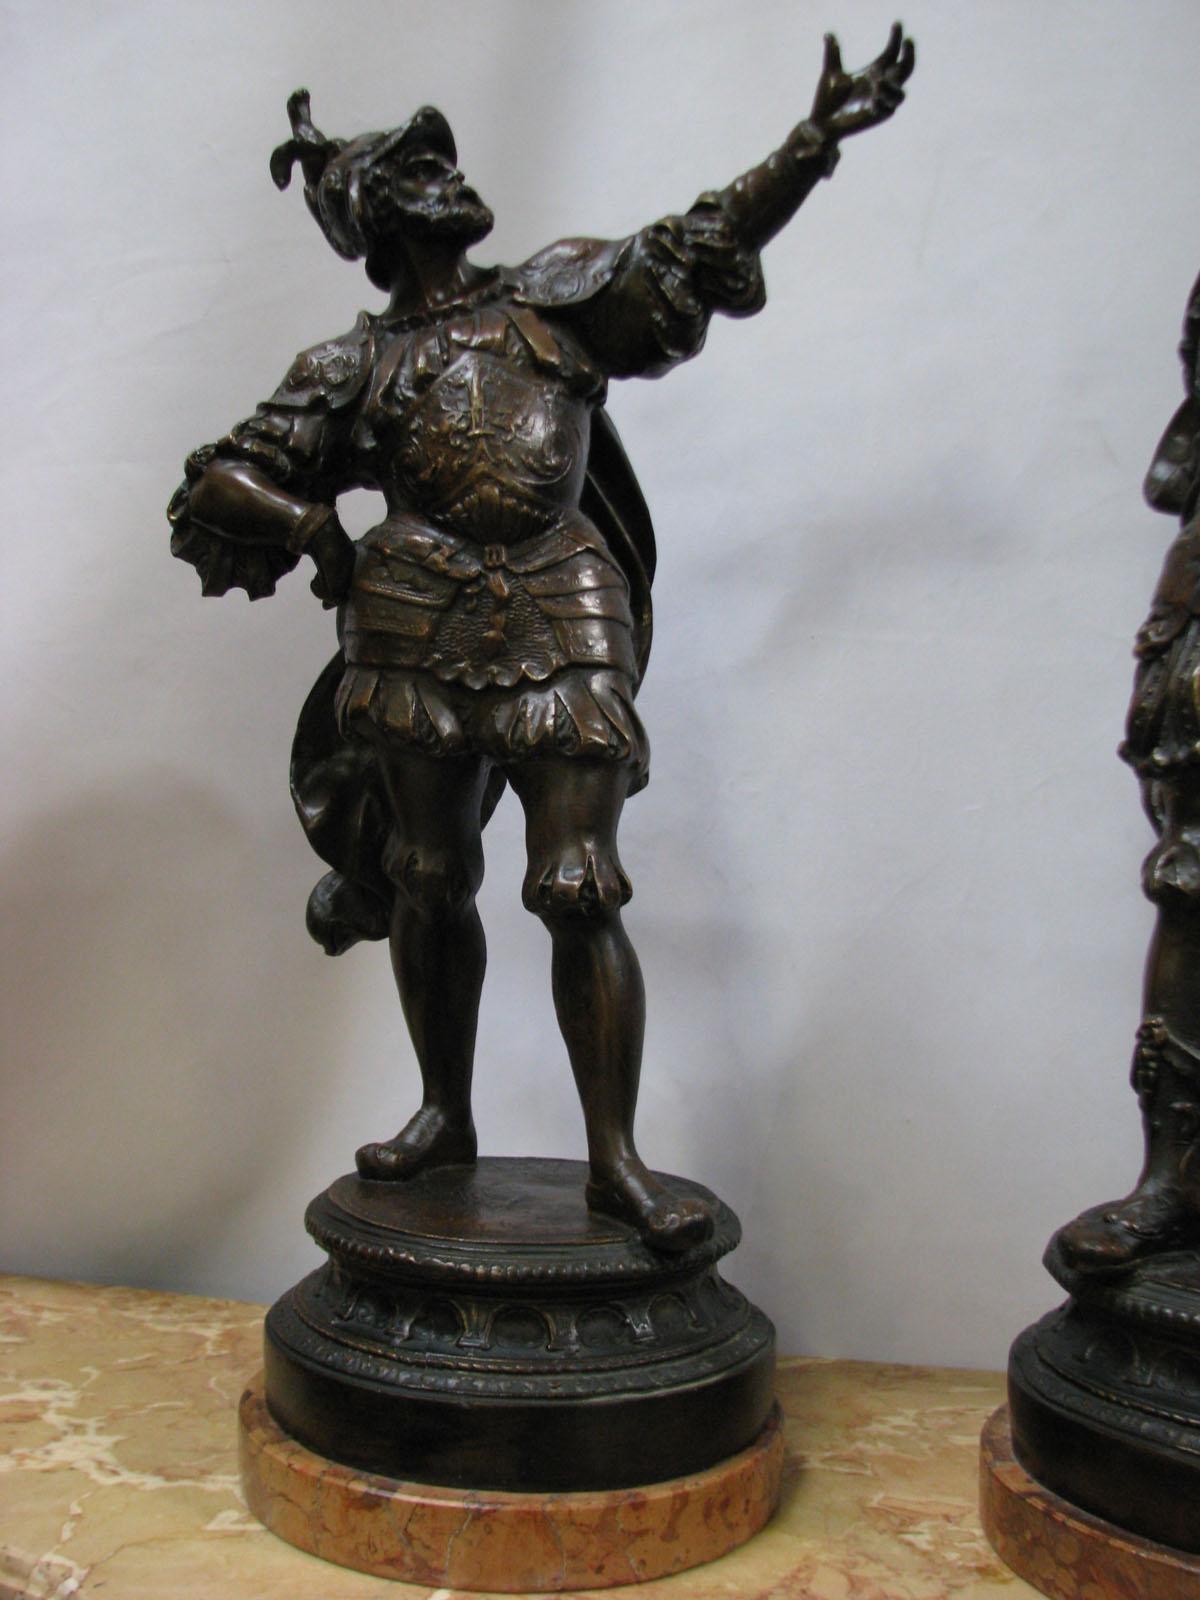 A spectacular pair of bronzes from the turn of the 19th and 20th century,
by Giovanni De Martino (1870-1935), depicting warriors in parade armors.
Both sculptures are signed 